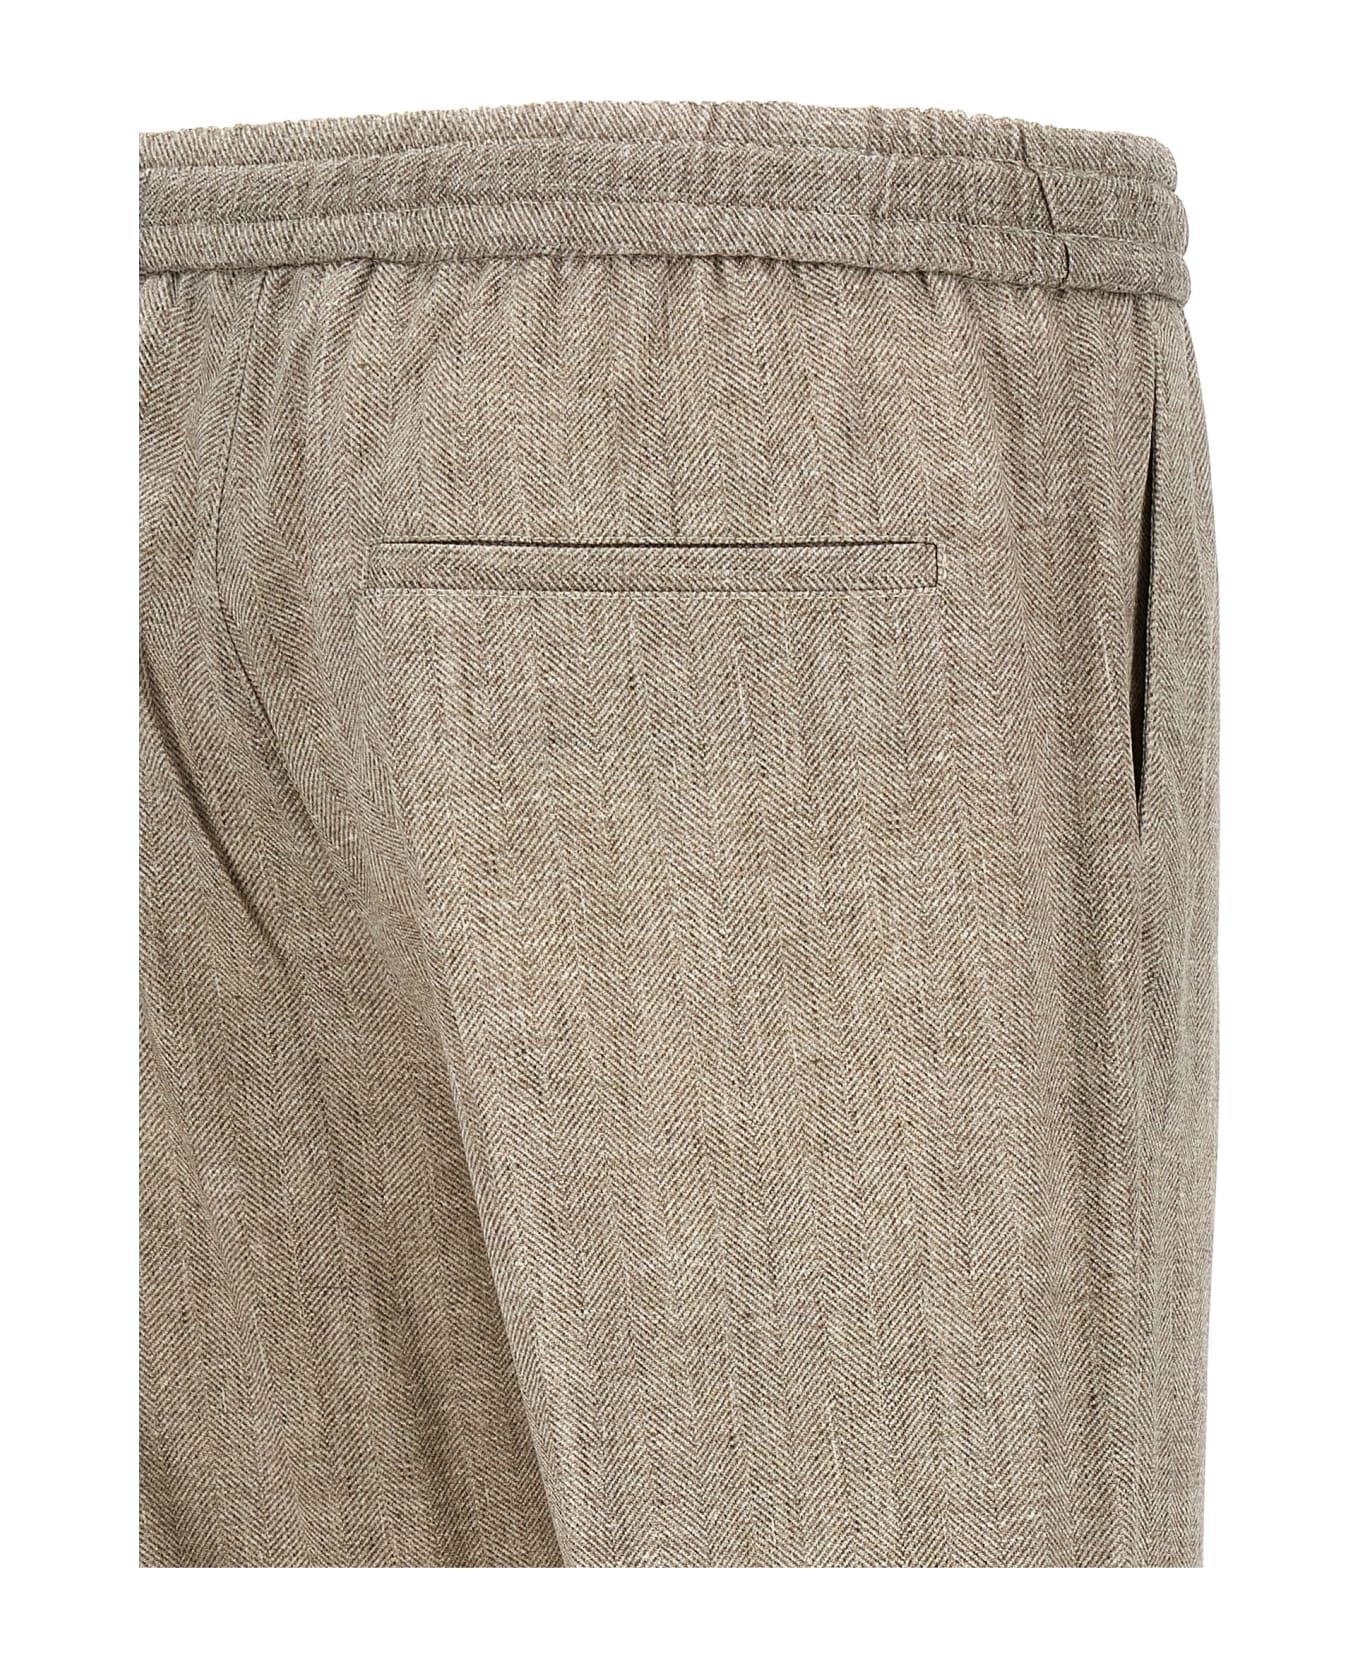 Circolo 1901 Barbed Pants - Beige